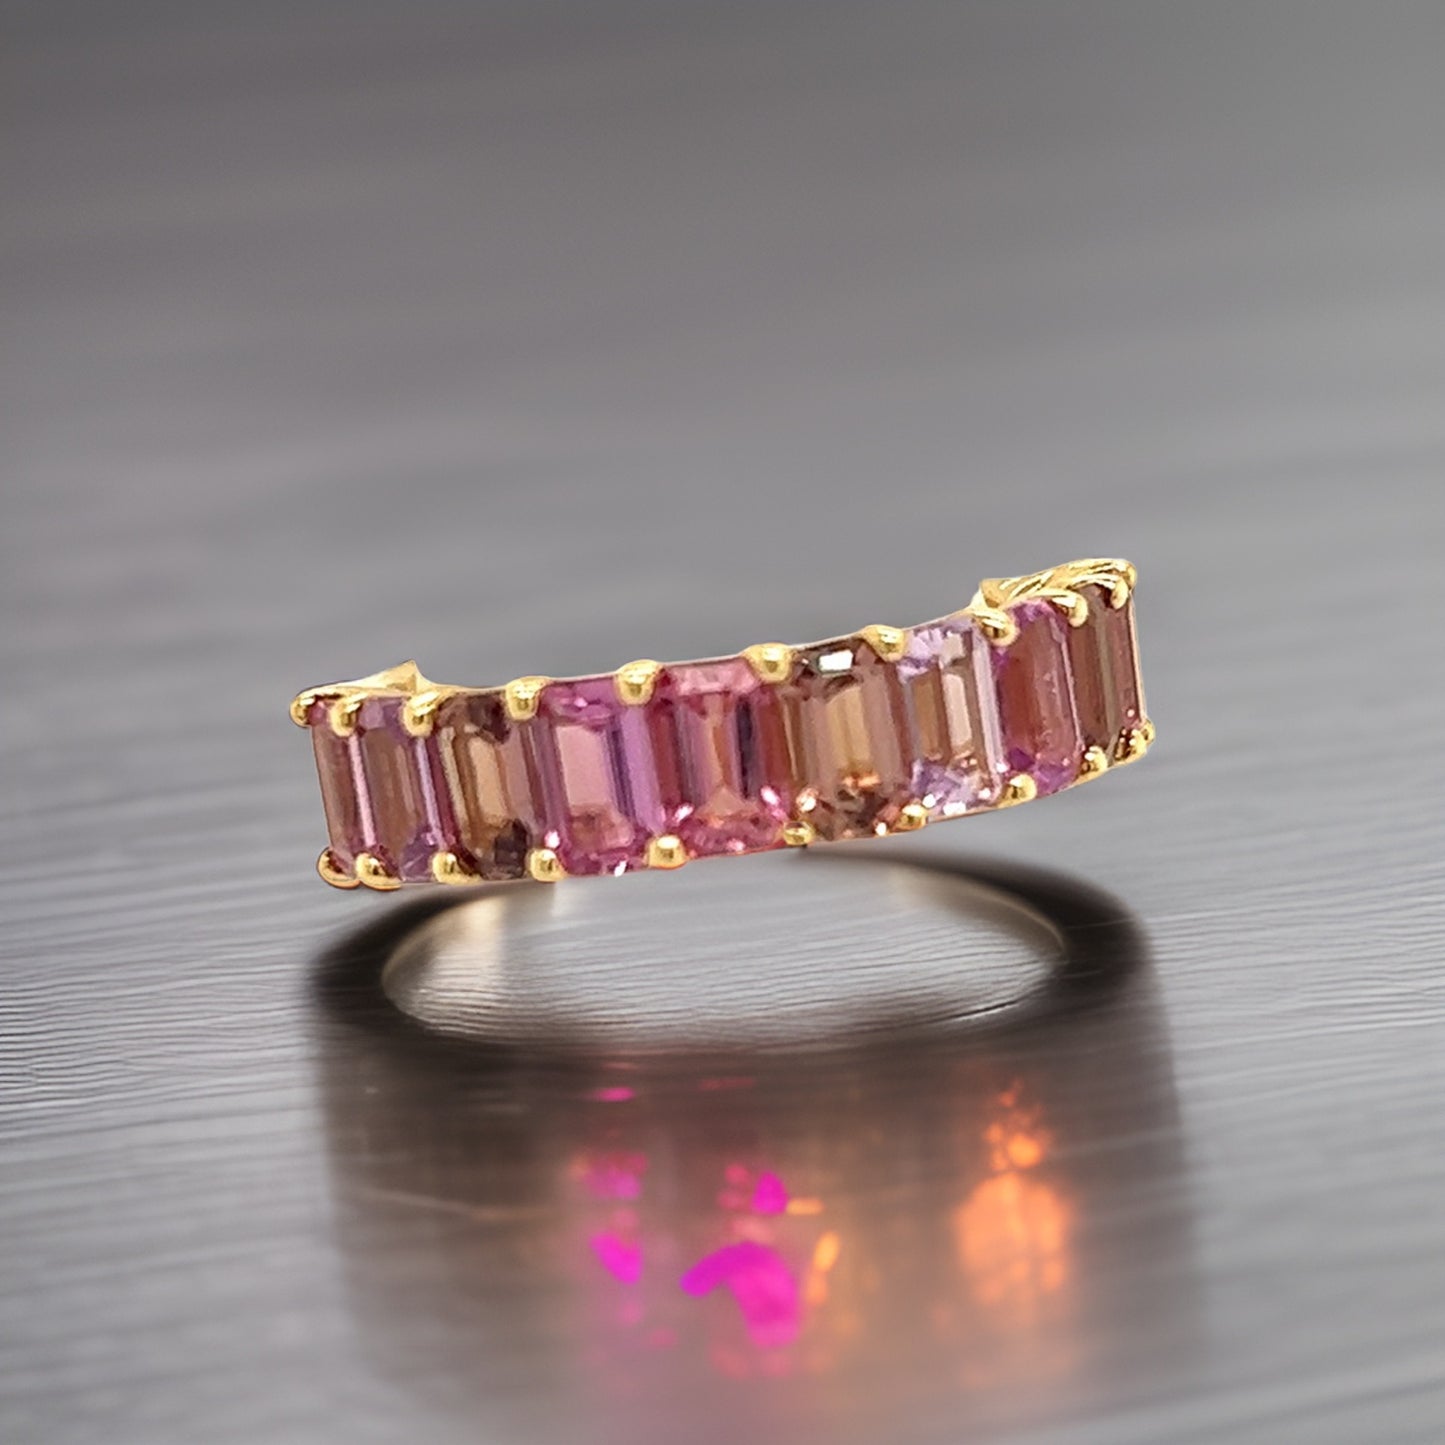 Natural Multi-Shade Sapphire Ring Size 6.5 14k Rose Gold 4.20 TCW Certified $4,950 217582 - Certified Fine Jewelry